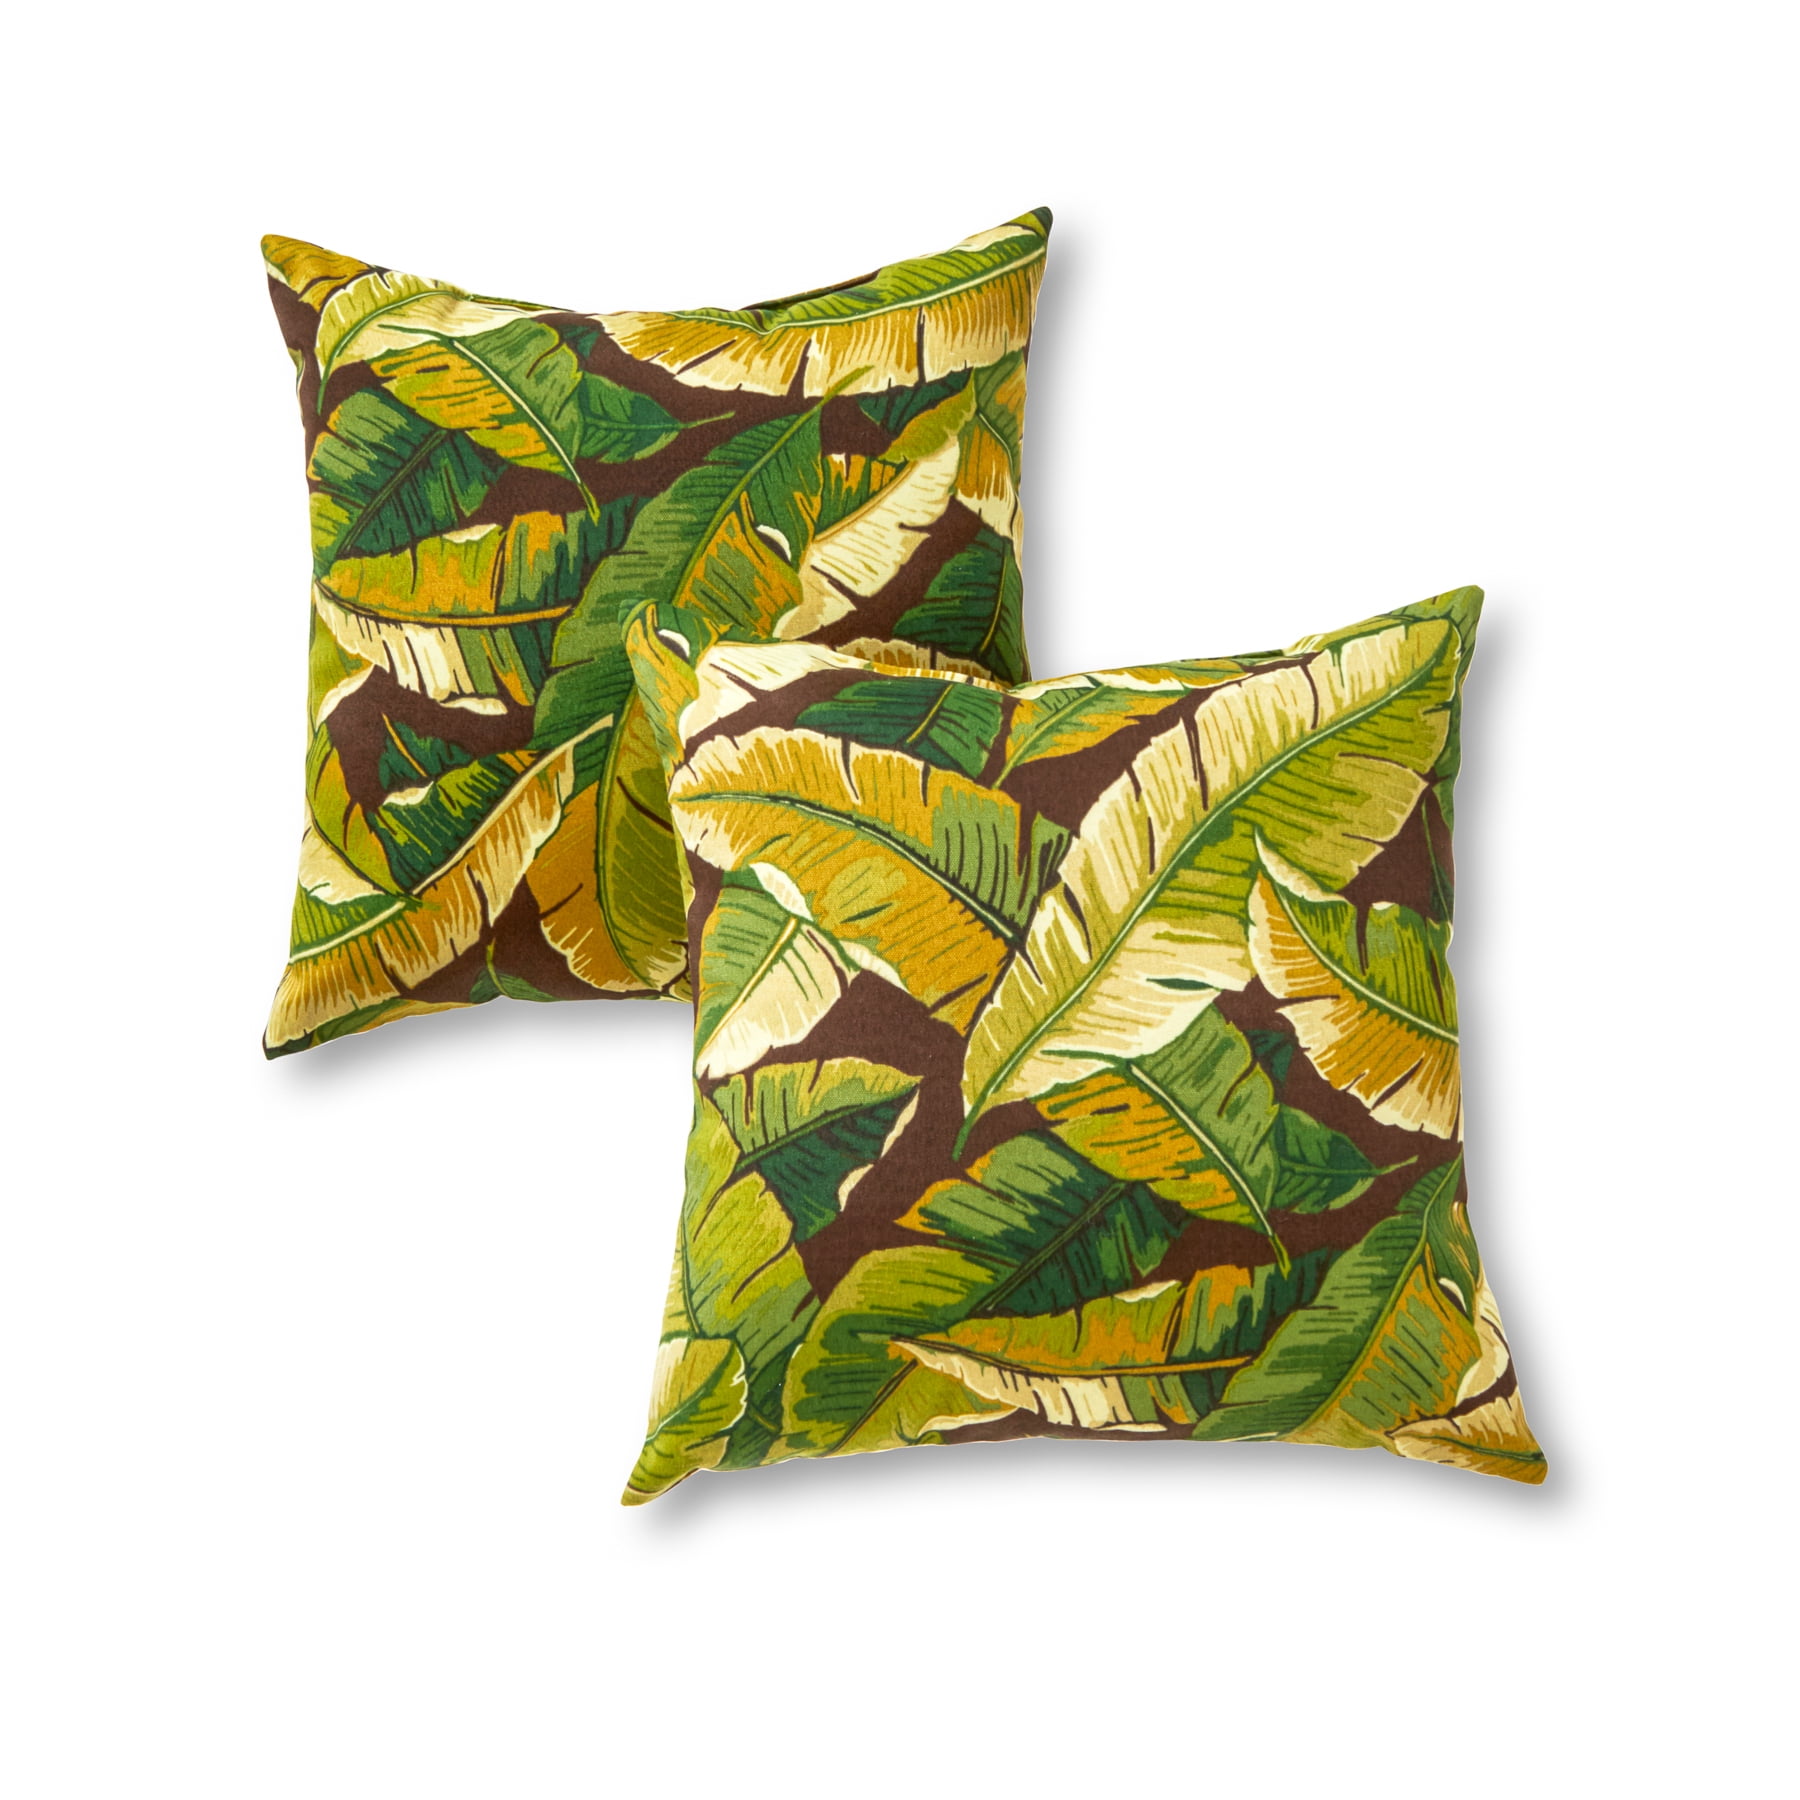 Set of 2 Tropical Palm Leaf Decorative Square Throw Pillows Choose Size 